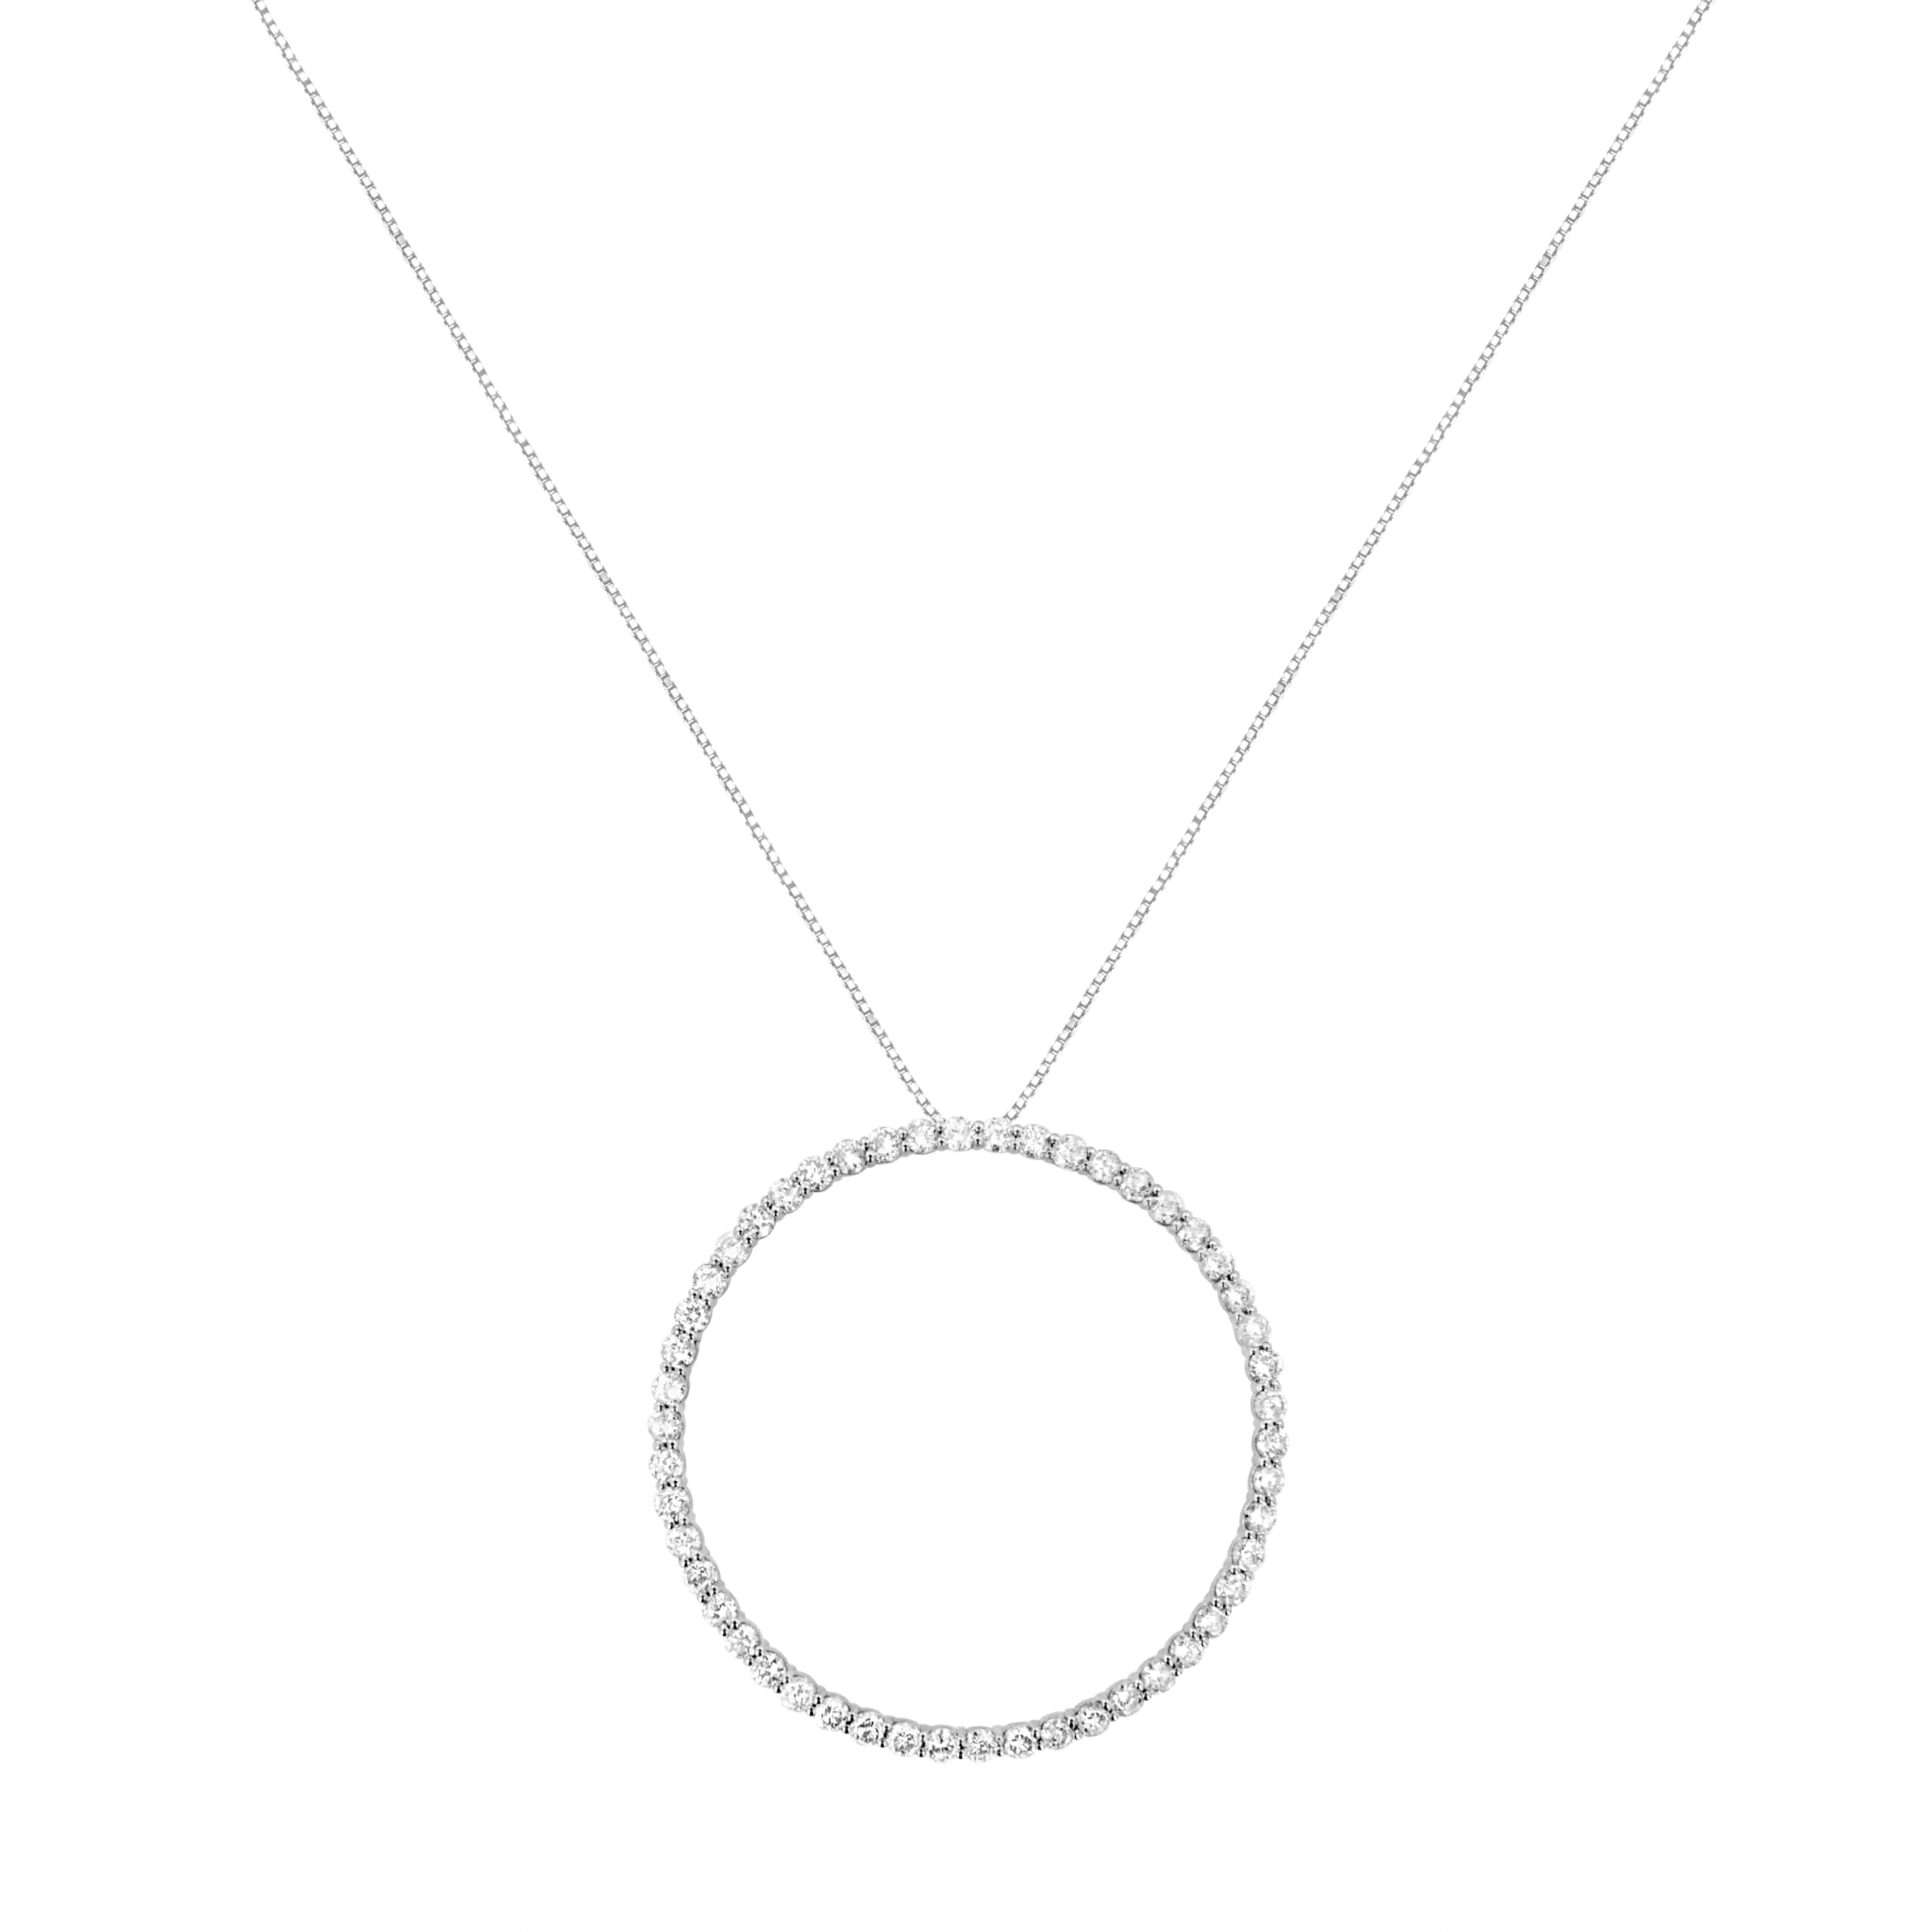 You can't go wrong with this simple and delicate circle pendant necklace. Crafted in cool sterling silver, this pendant features 4ct TDW of diamonds. 50 glistening round cut diamonds line this open circle pendant that dangles from a rope chain and